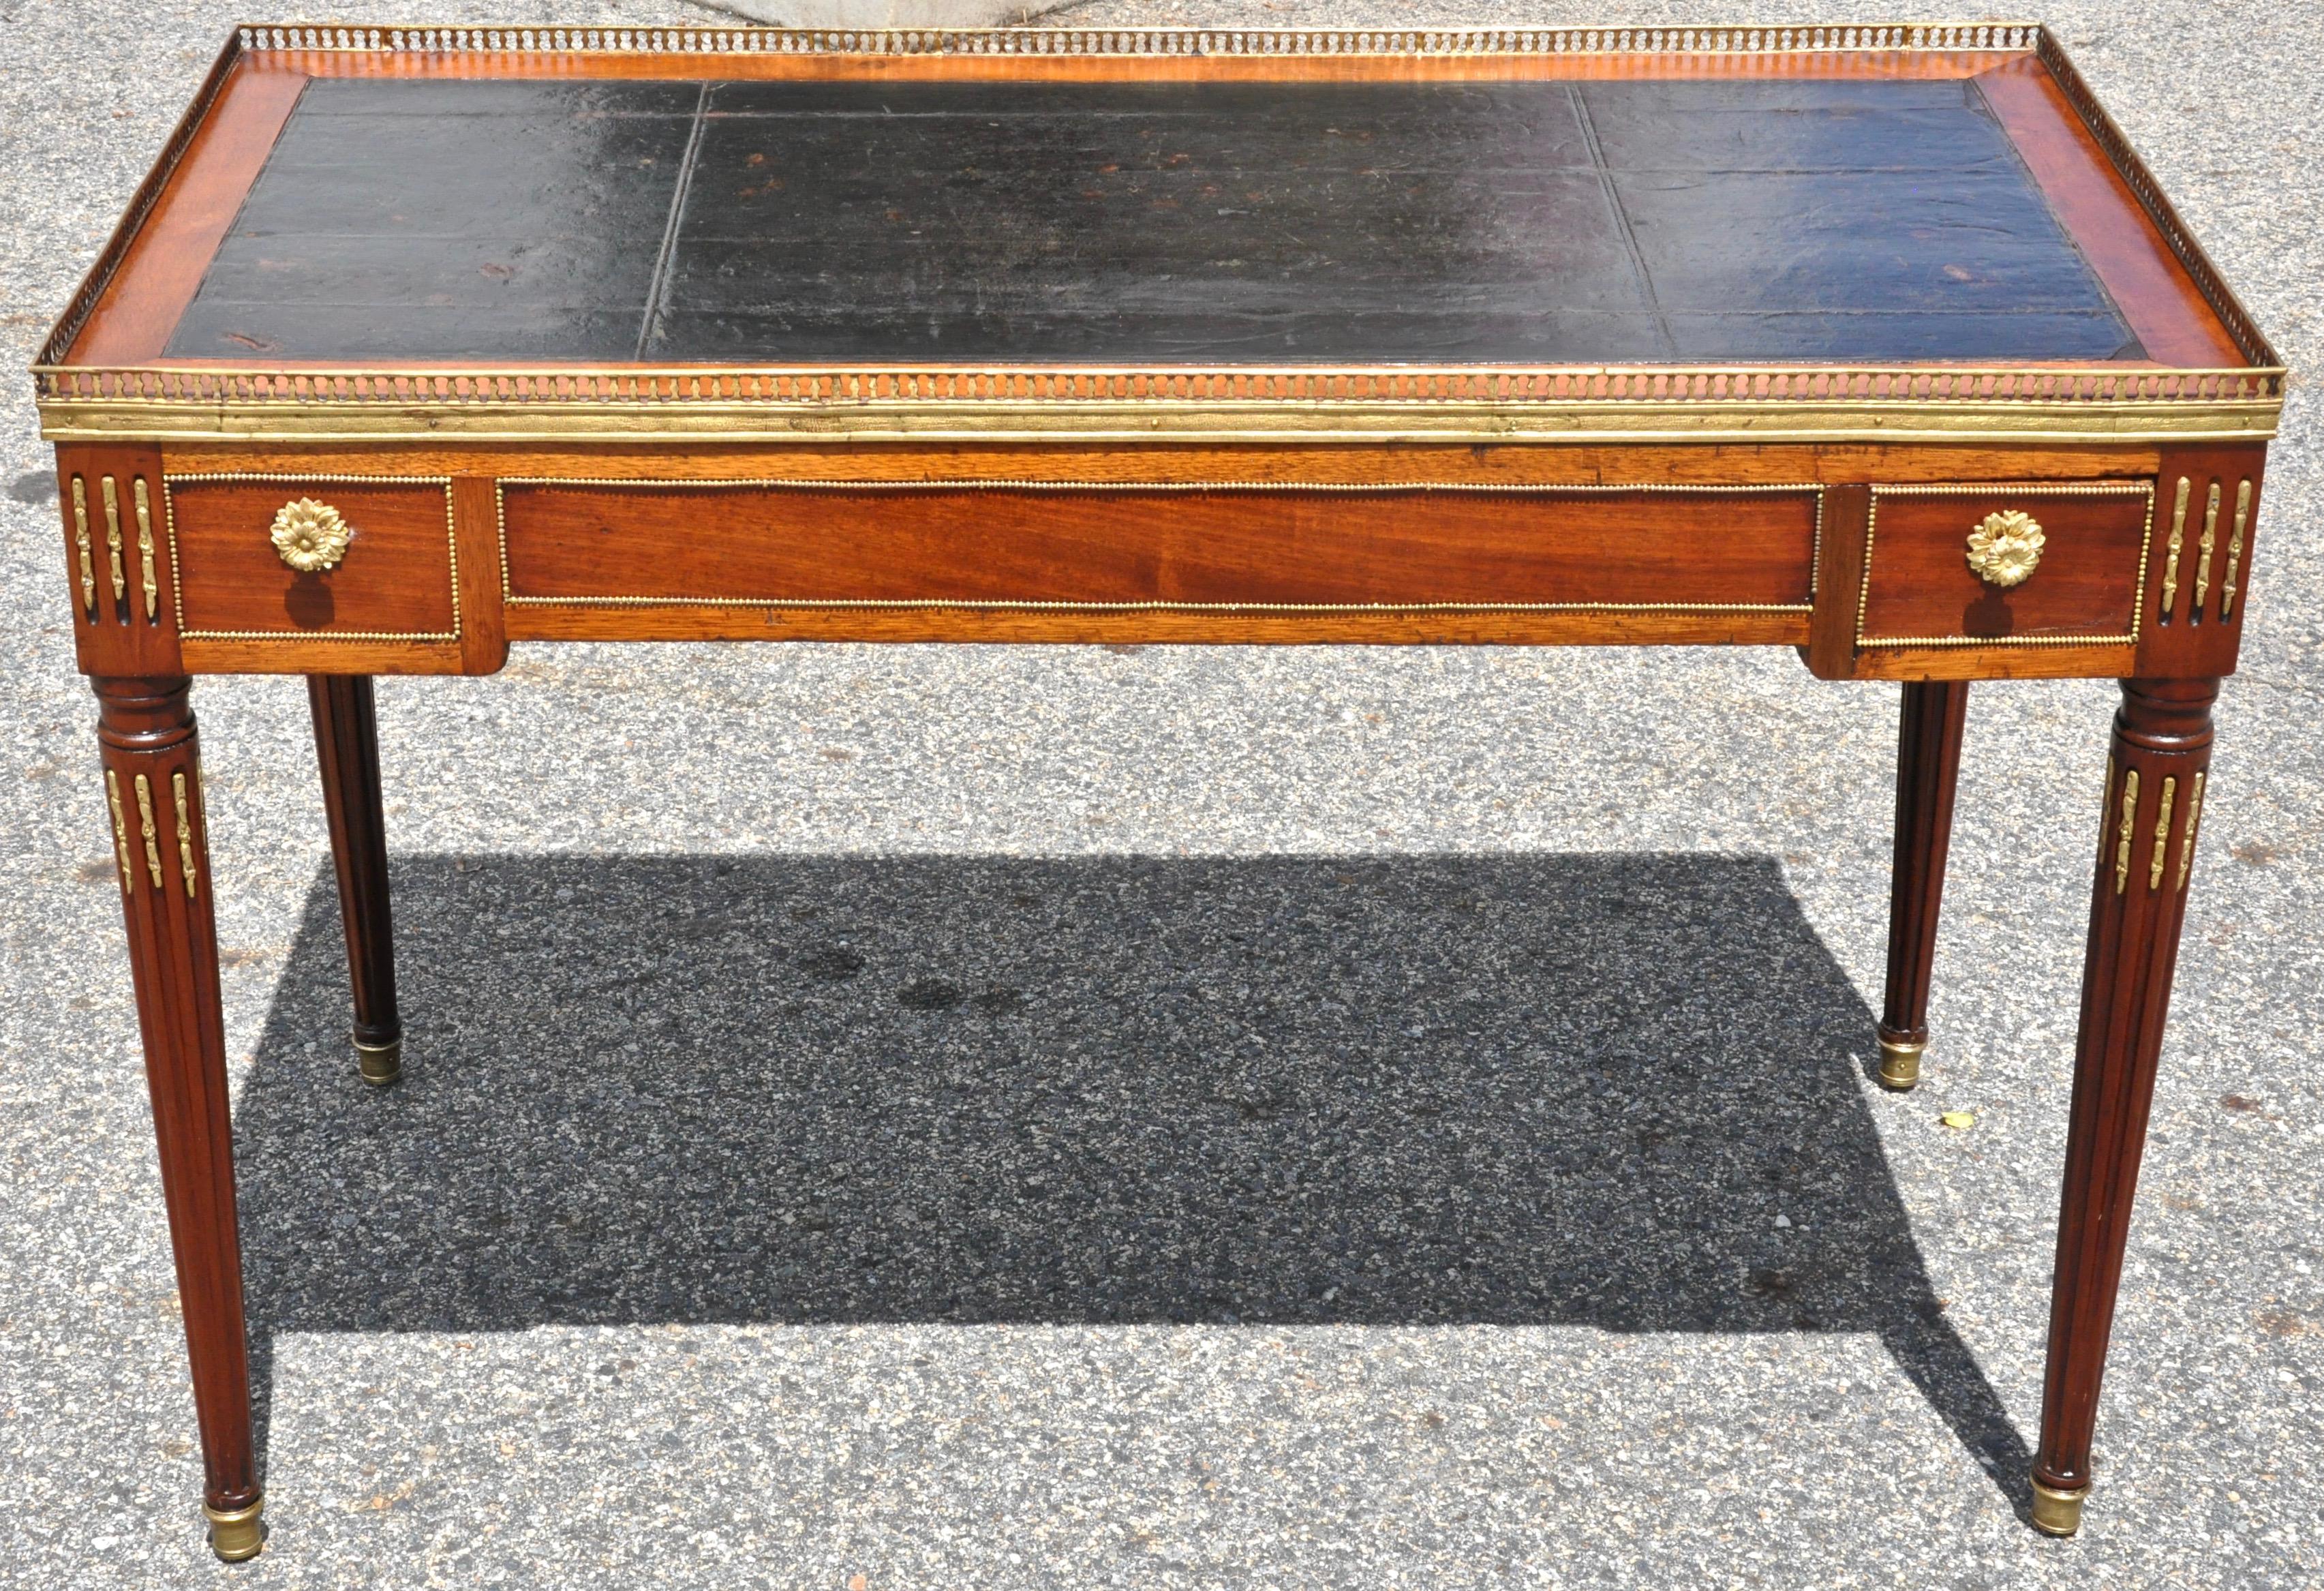 Period mahogany, ebony and bone Louis XVI backgammon or tric-trac games table

Original ormolu-mounted Louis XVI form with tapered and fluted legs. Original well with inlaid ebony, bone backgammon board. Opposing drawers to hold draughts.